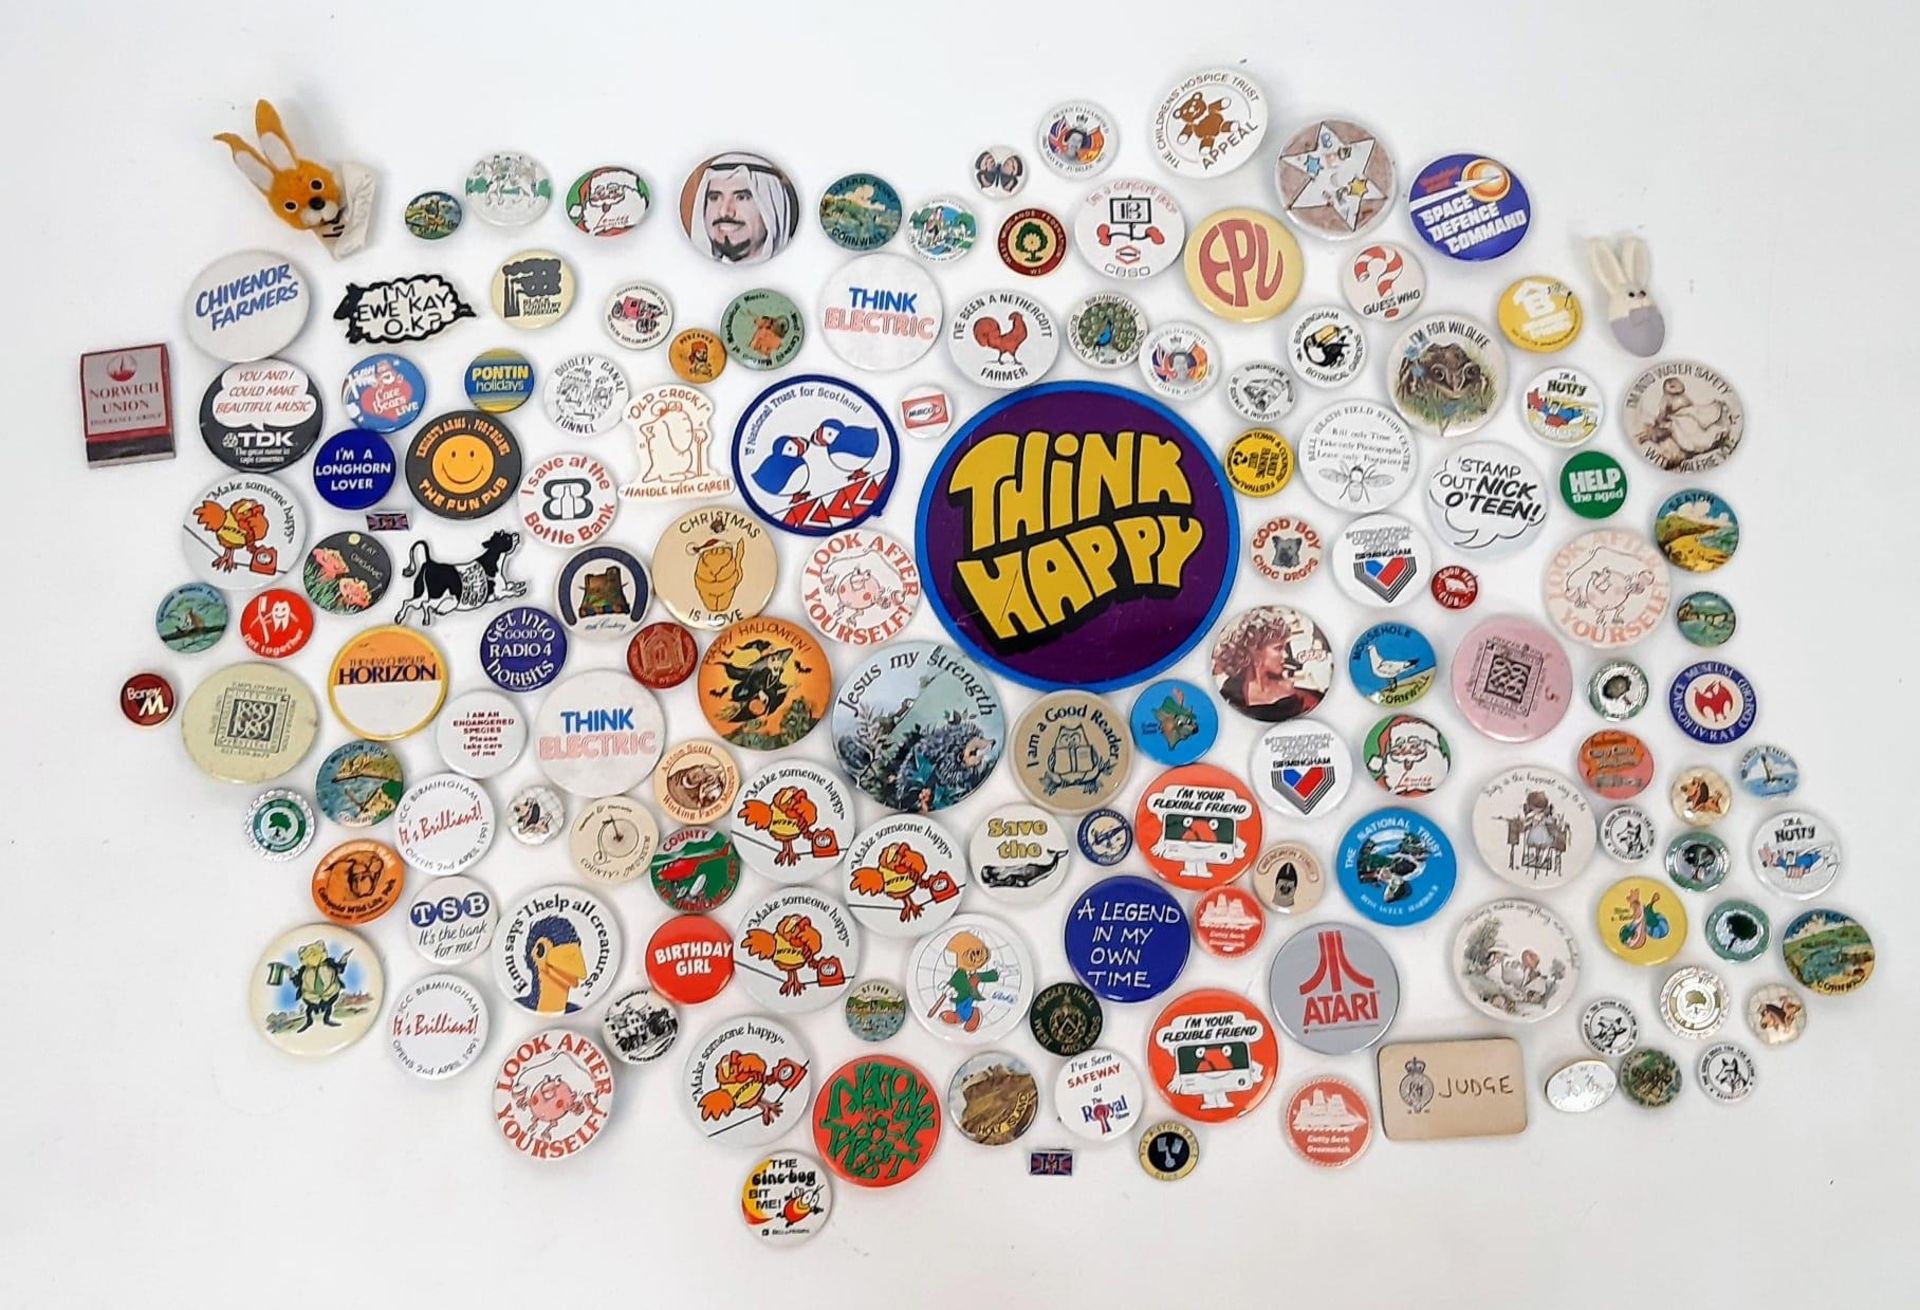 A Box of Vintage Pin Badges - Some absolute classics!